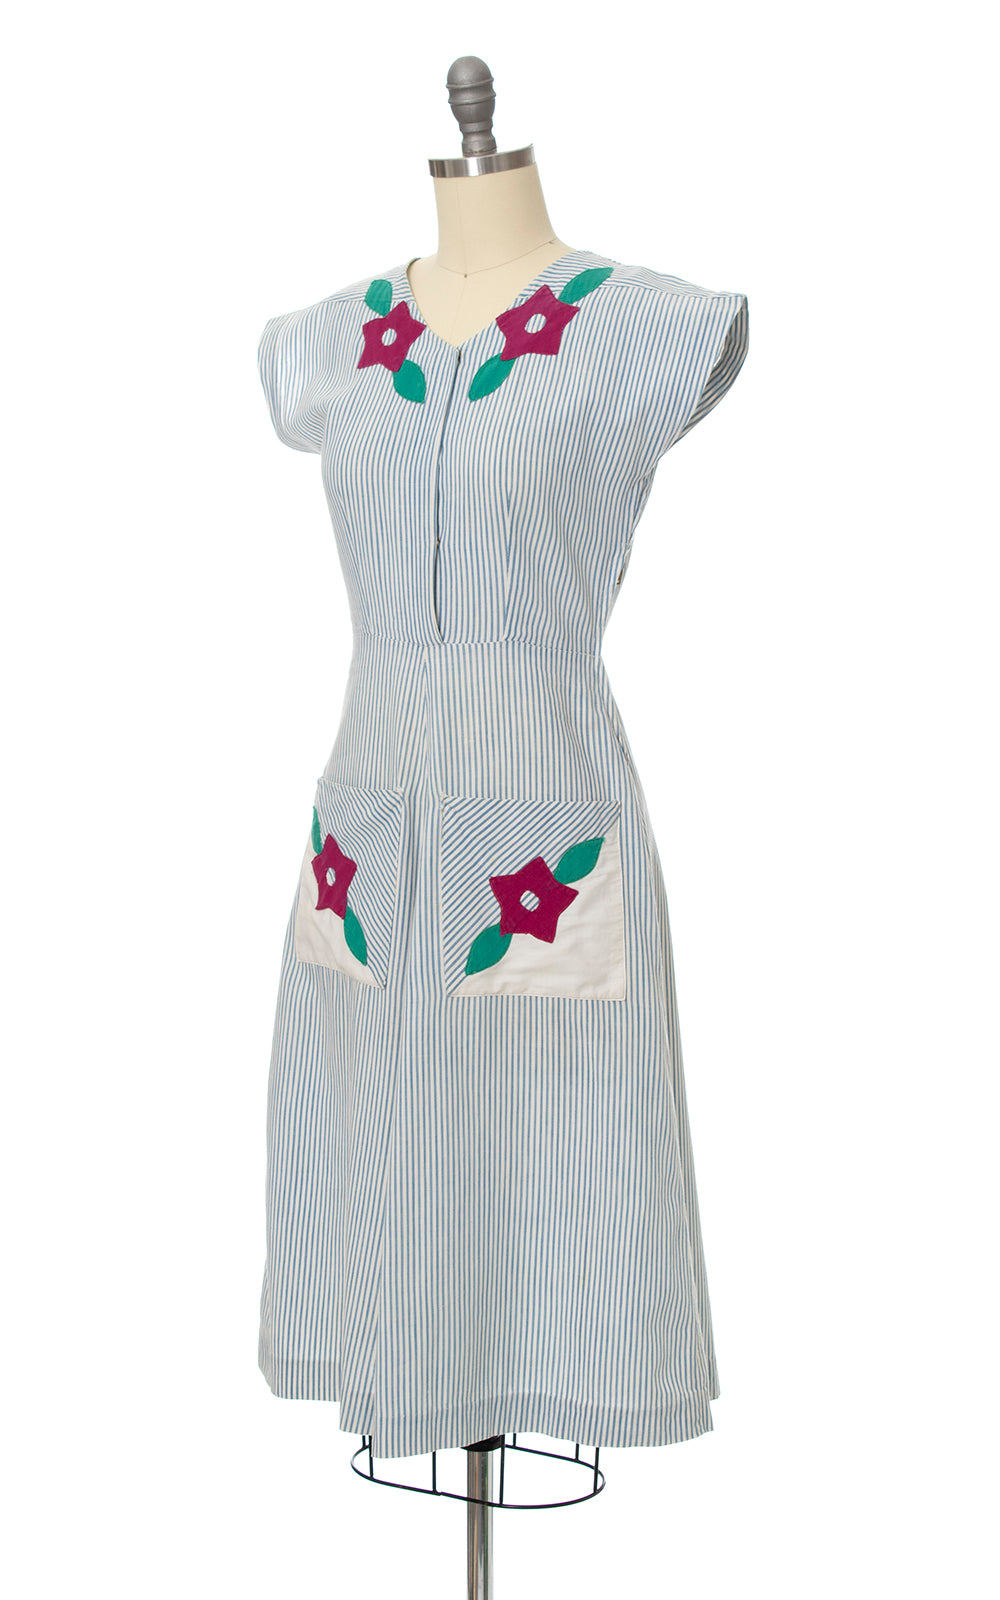 1930s 1940s Floral Appliqué Dress with Pockets | x-small/small